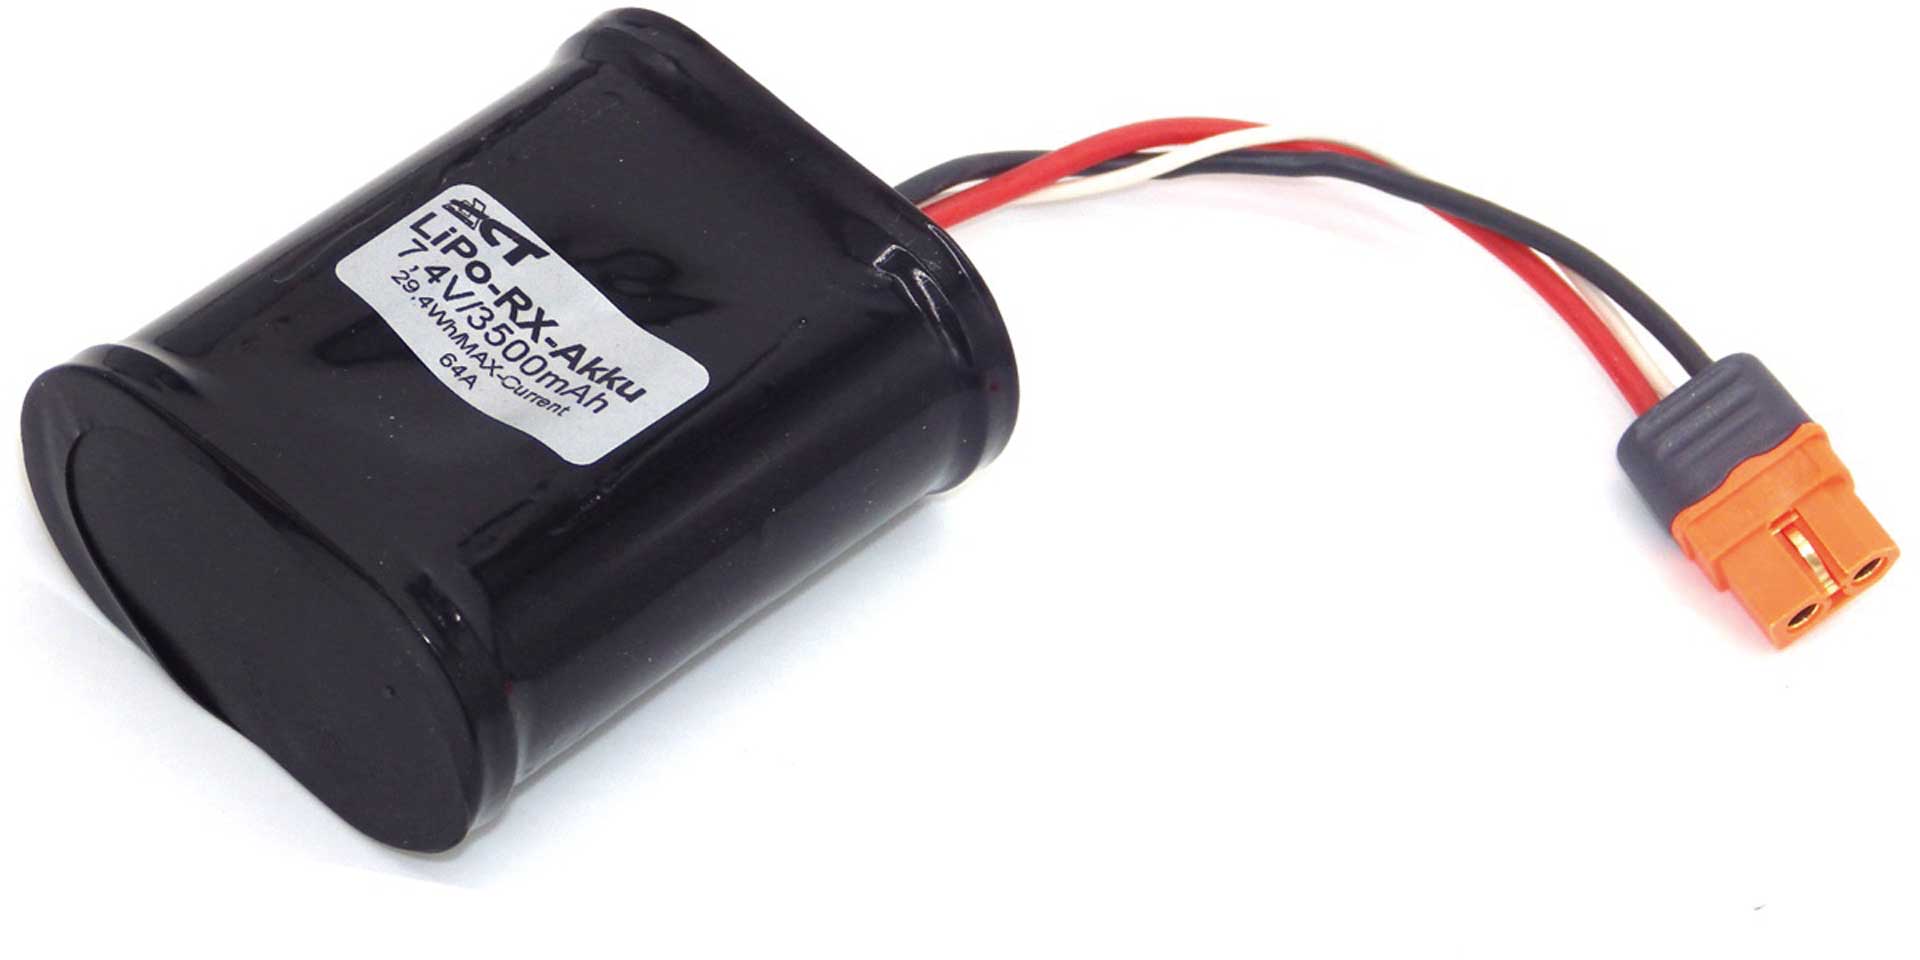 ACT Receiver battery LiPo 7.4V 3500mAh High-current battery in metal housing - XT60 balancer connection